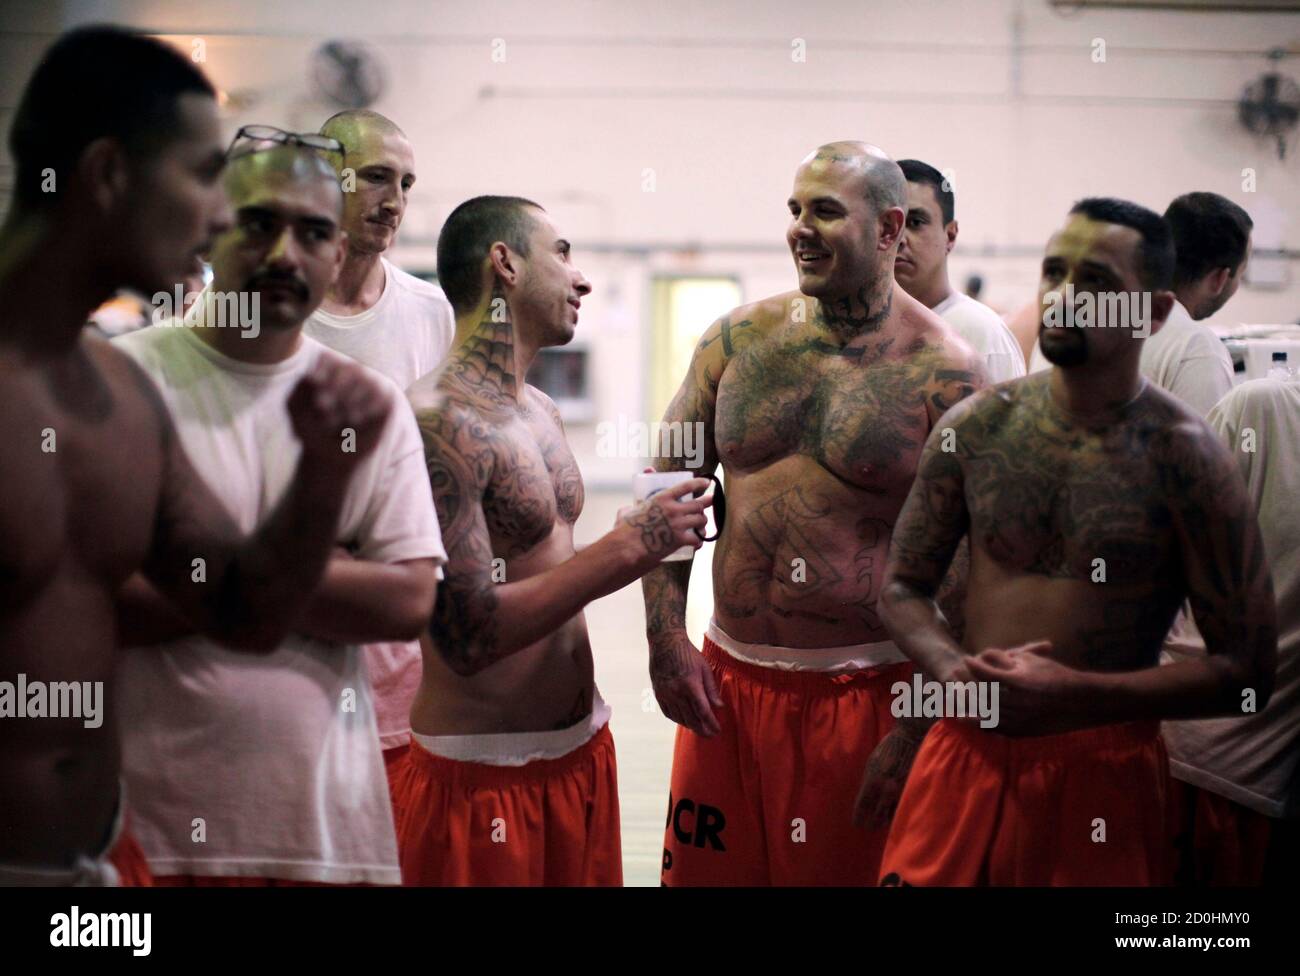 Inmates stand in a gymnasium where they are housed due to overcrowding at the California Institution for Men state prison in Chino, California, June 3, 2011. The Supreme Court has ordered California to release more than 30,000 inmates over the next two years or take other steps to ease overcrowding in its prisons to prevent 'needless suffering and death.' California's 33 adult prisons were designed to hold about 80,000 inmates and now have about 145,000. The U.S. has more than 2 million people in state and local prisons. It has long had the highest incarceration rate in the world. REUTERS/Lucy Stock Photo